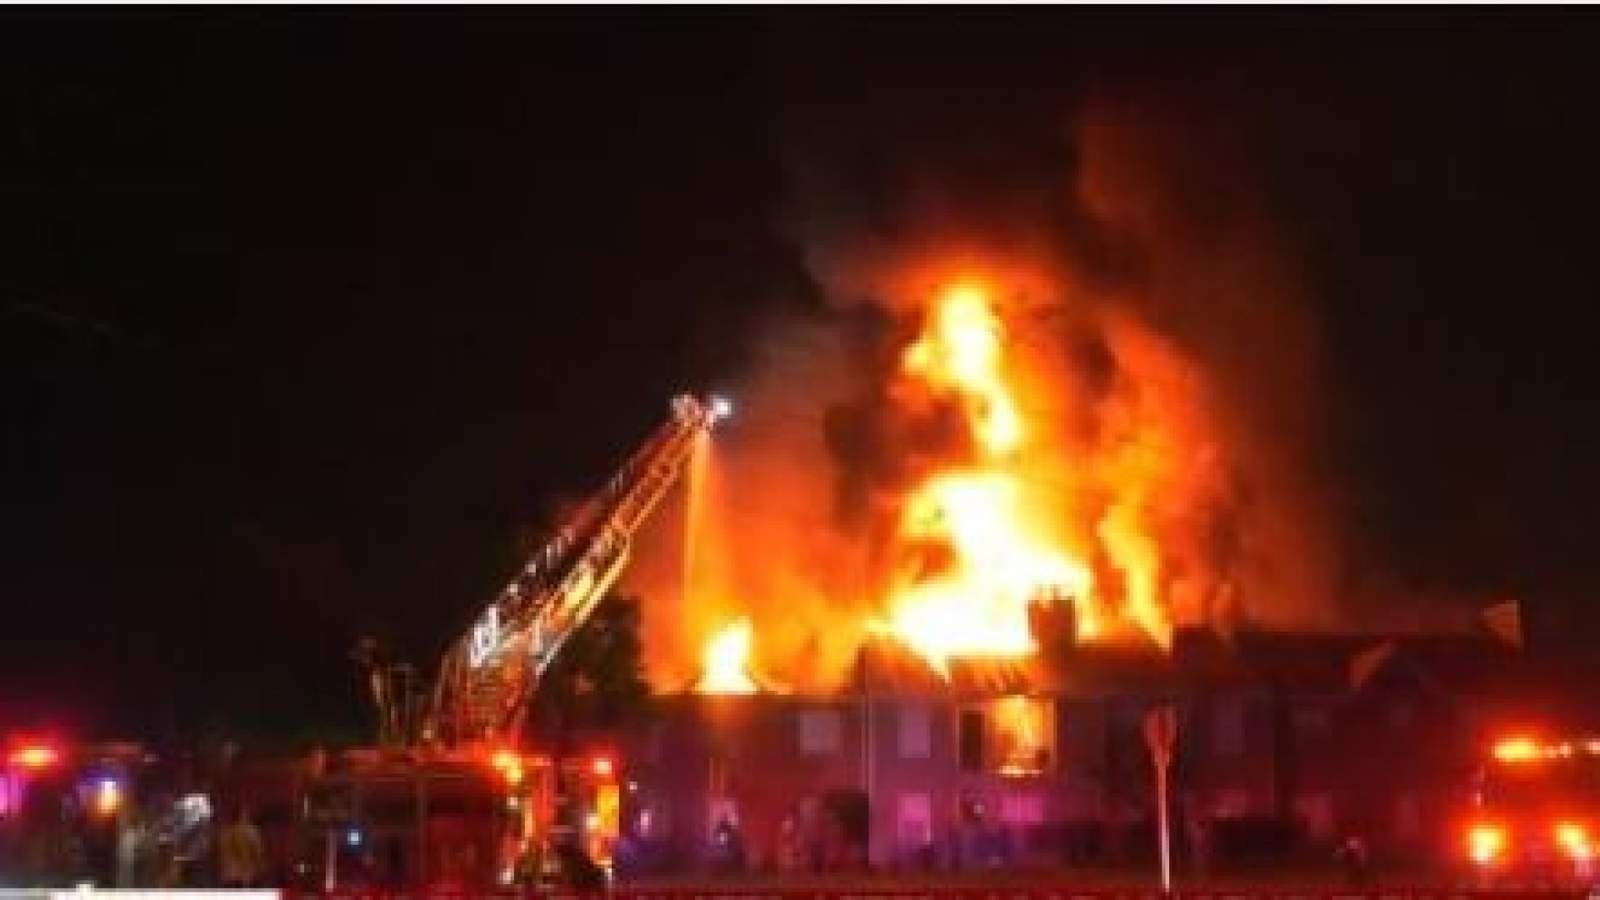 Mother says she’s 'lucky to be alive’ after massive blaze at apartment complex in Tomball